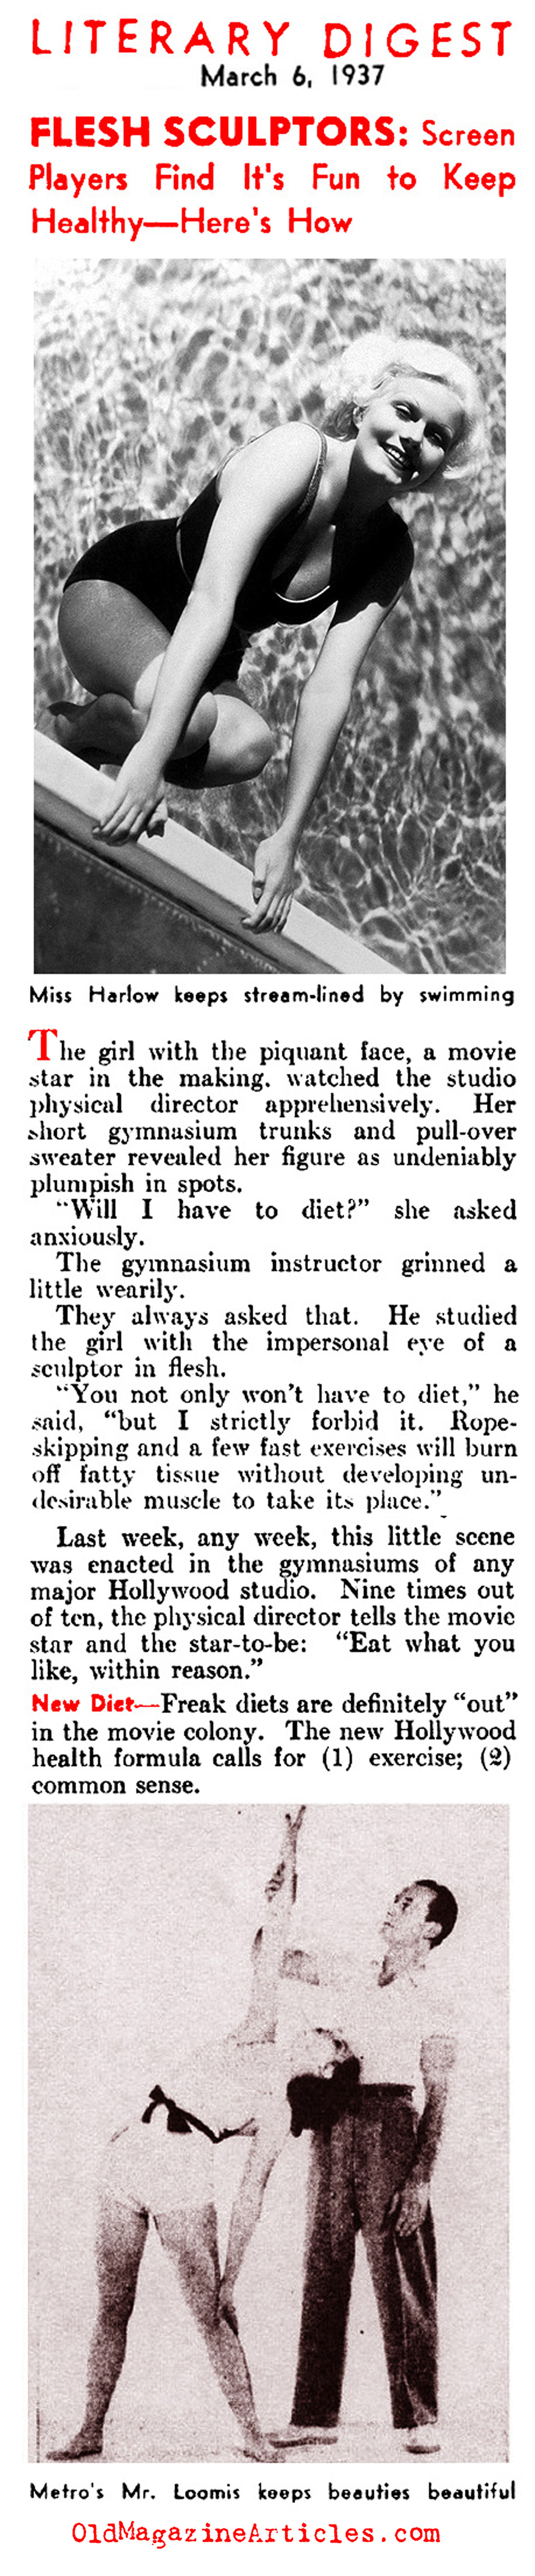 The Old Hollywood Way to Physical Perfection (Literary Digest, 1937)